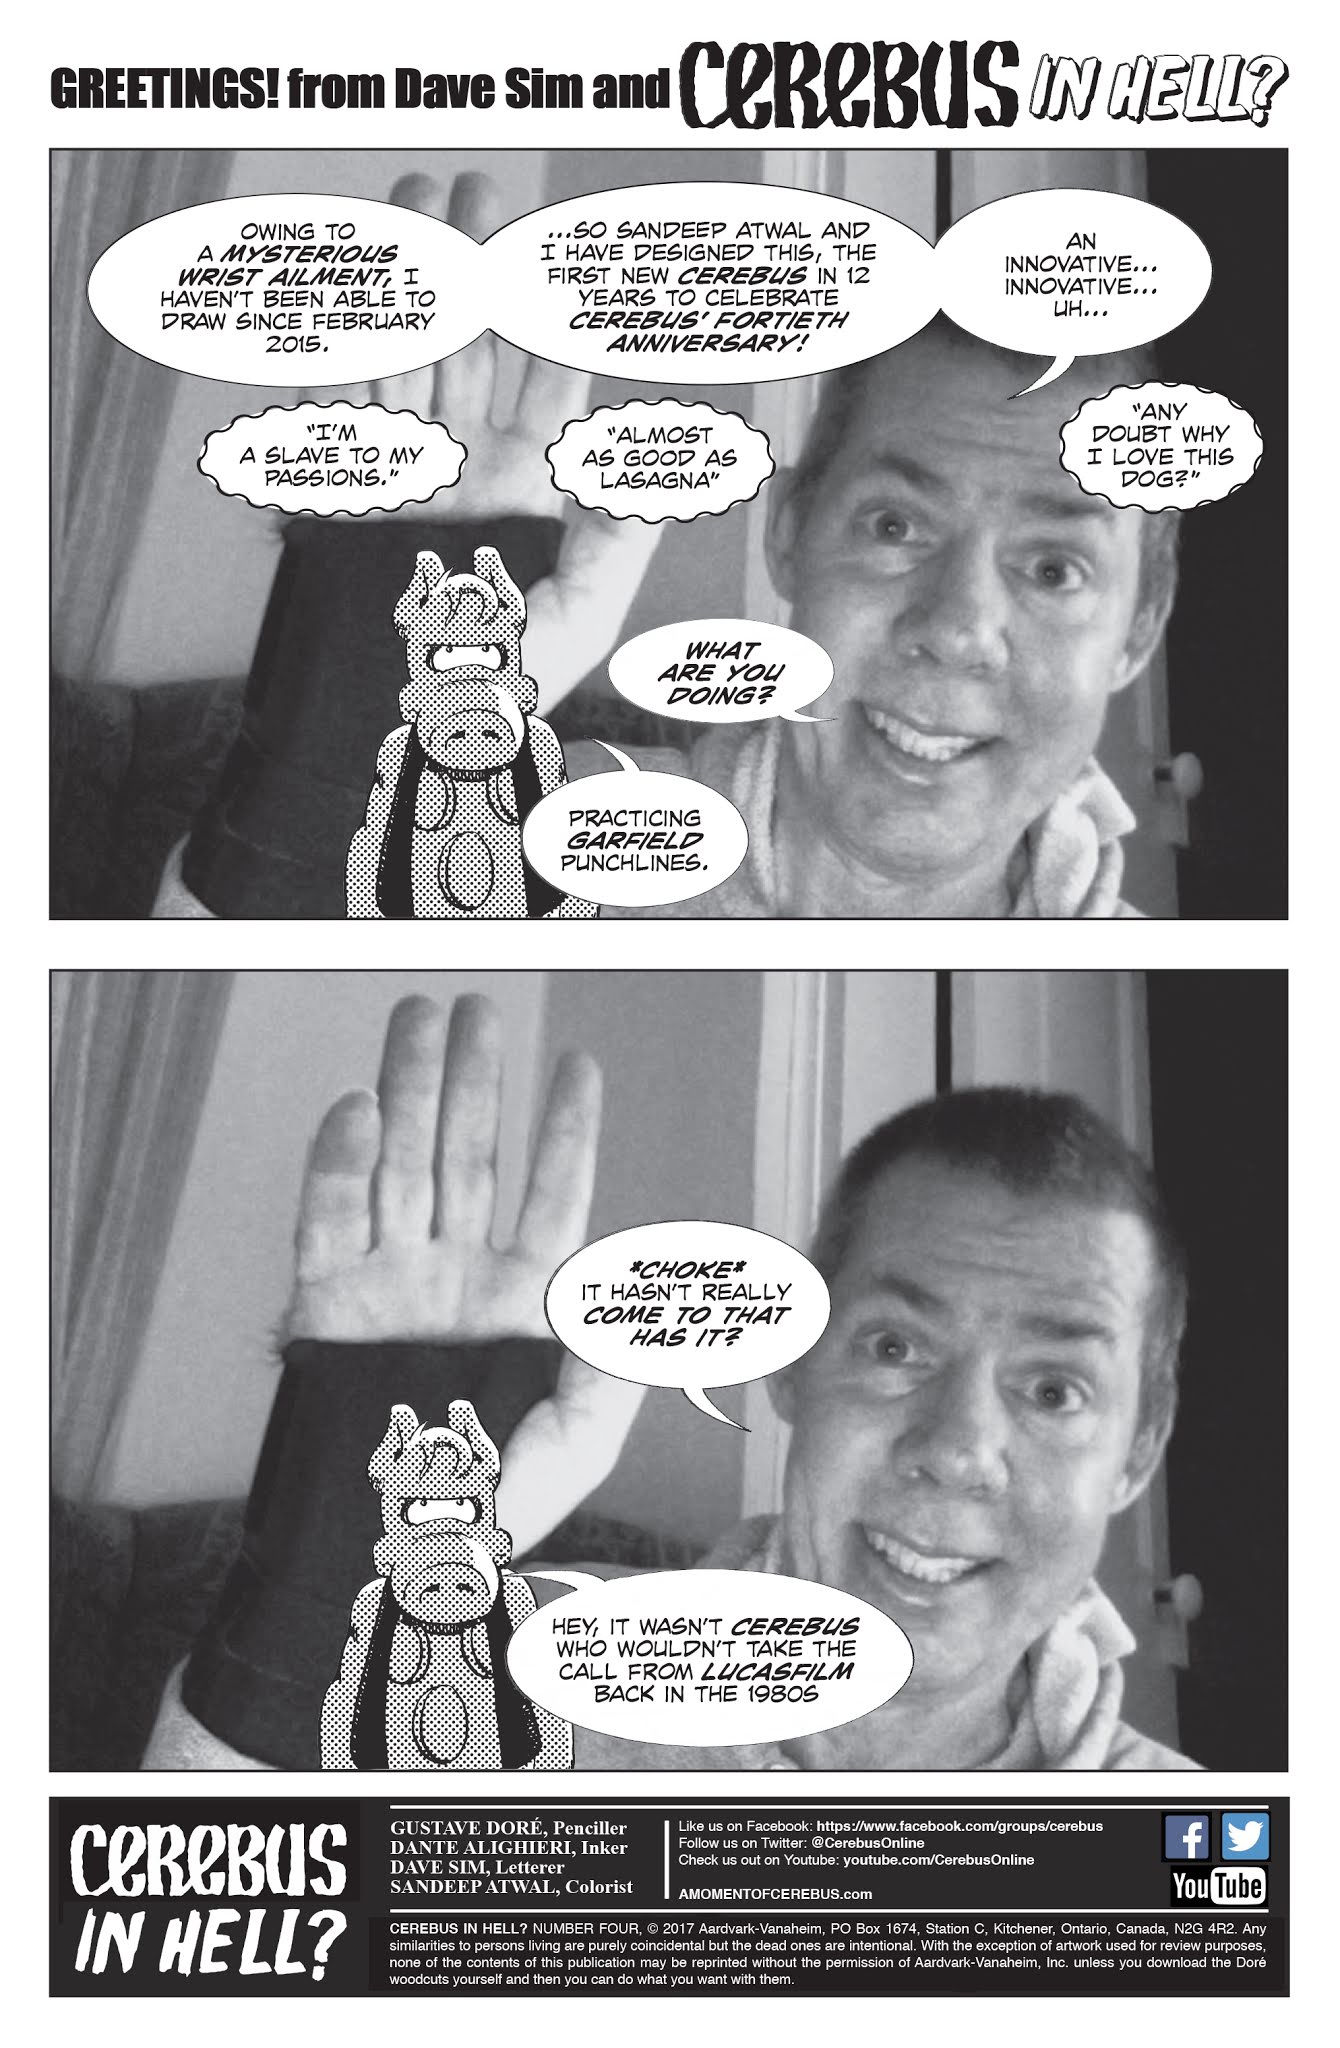 Read online Cerebus in Hell? comic -  Issue #4 - 2